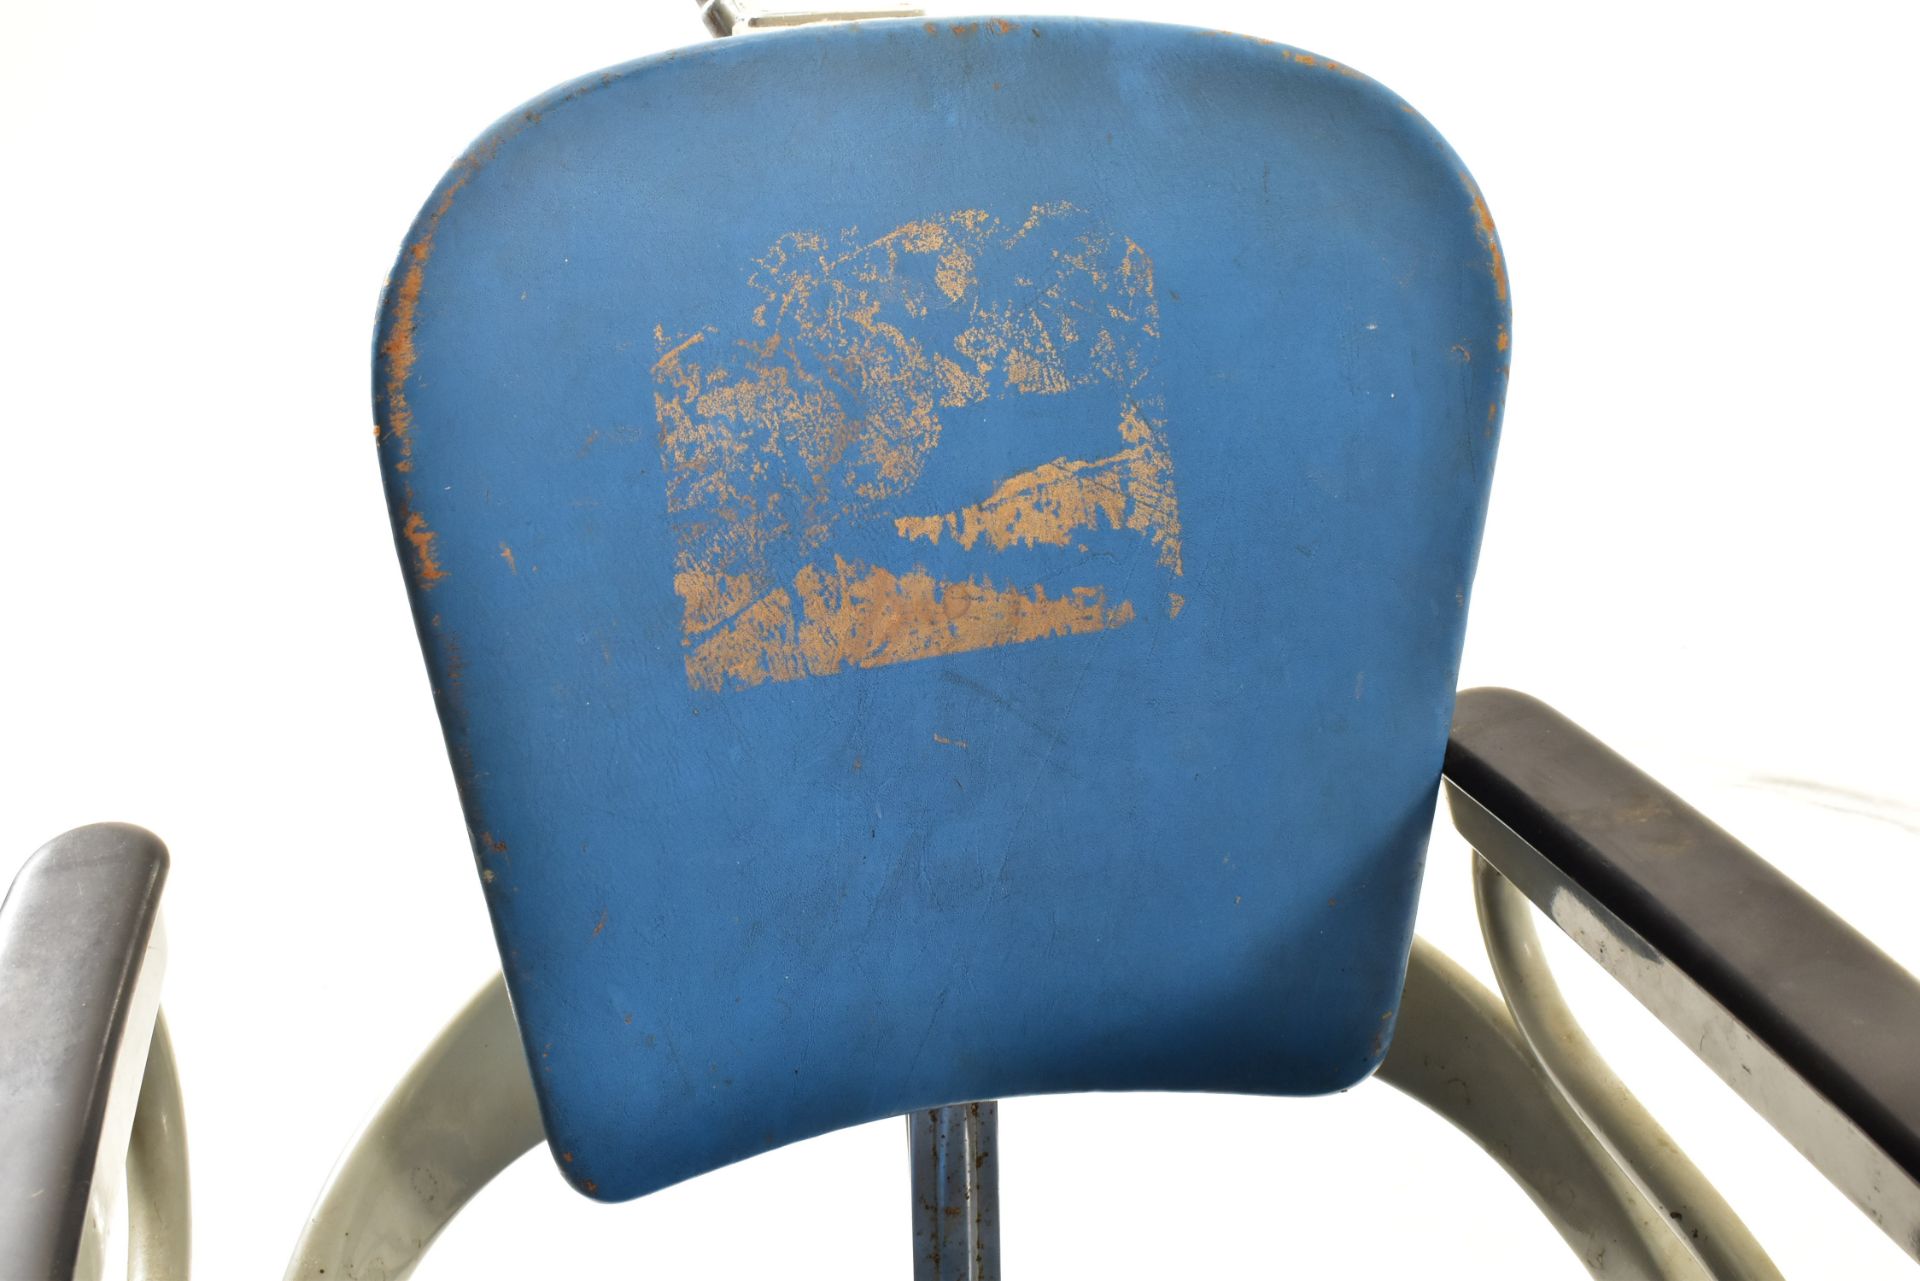 RITTER AG - MID CENTURY 1940S DENTIST ARTICULATED CHAIR - Image 6 of 8